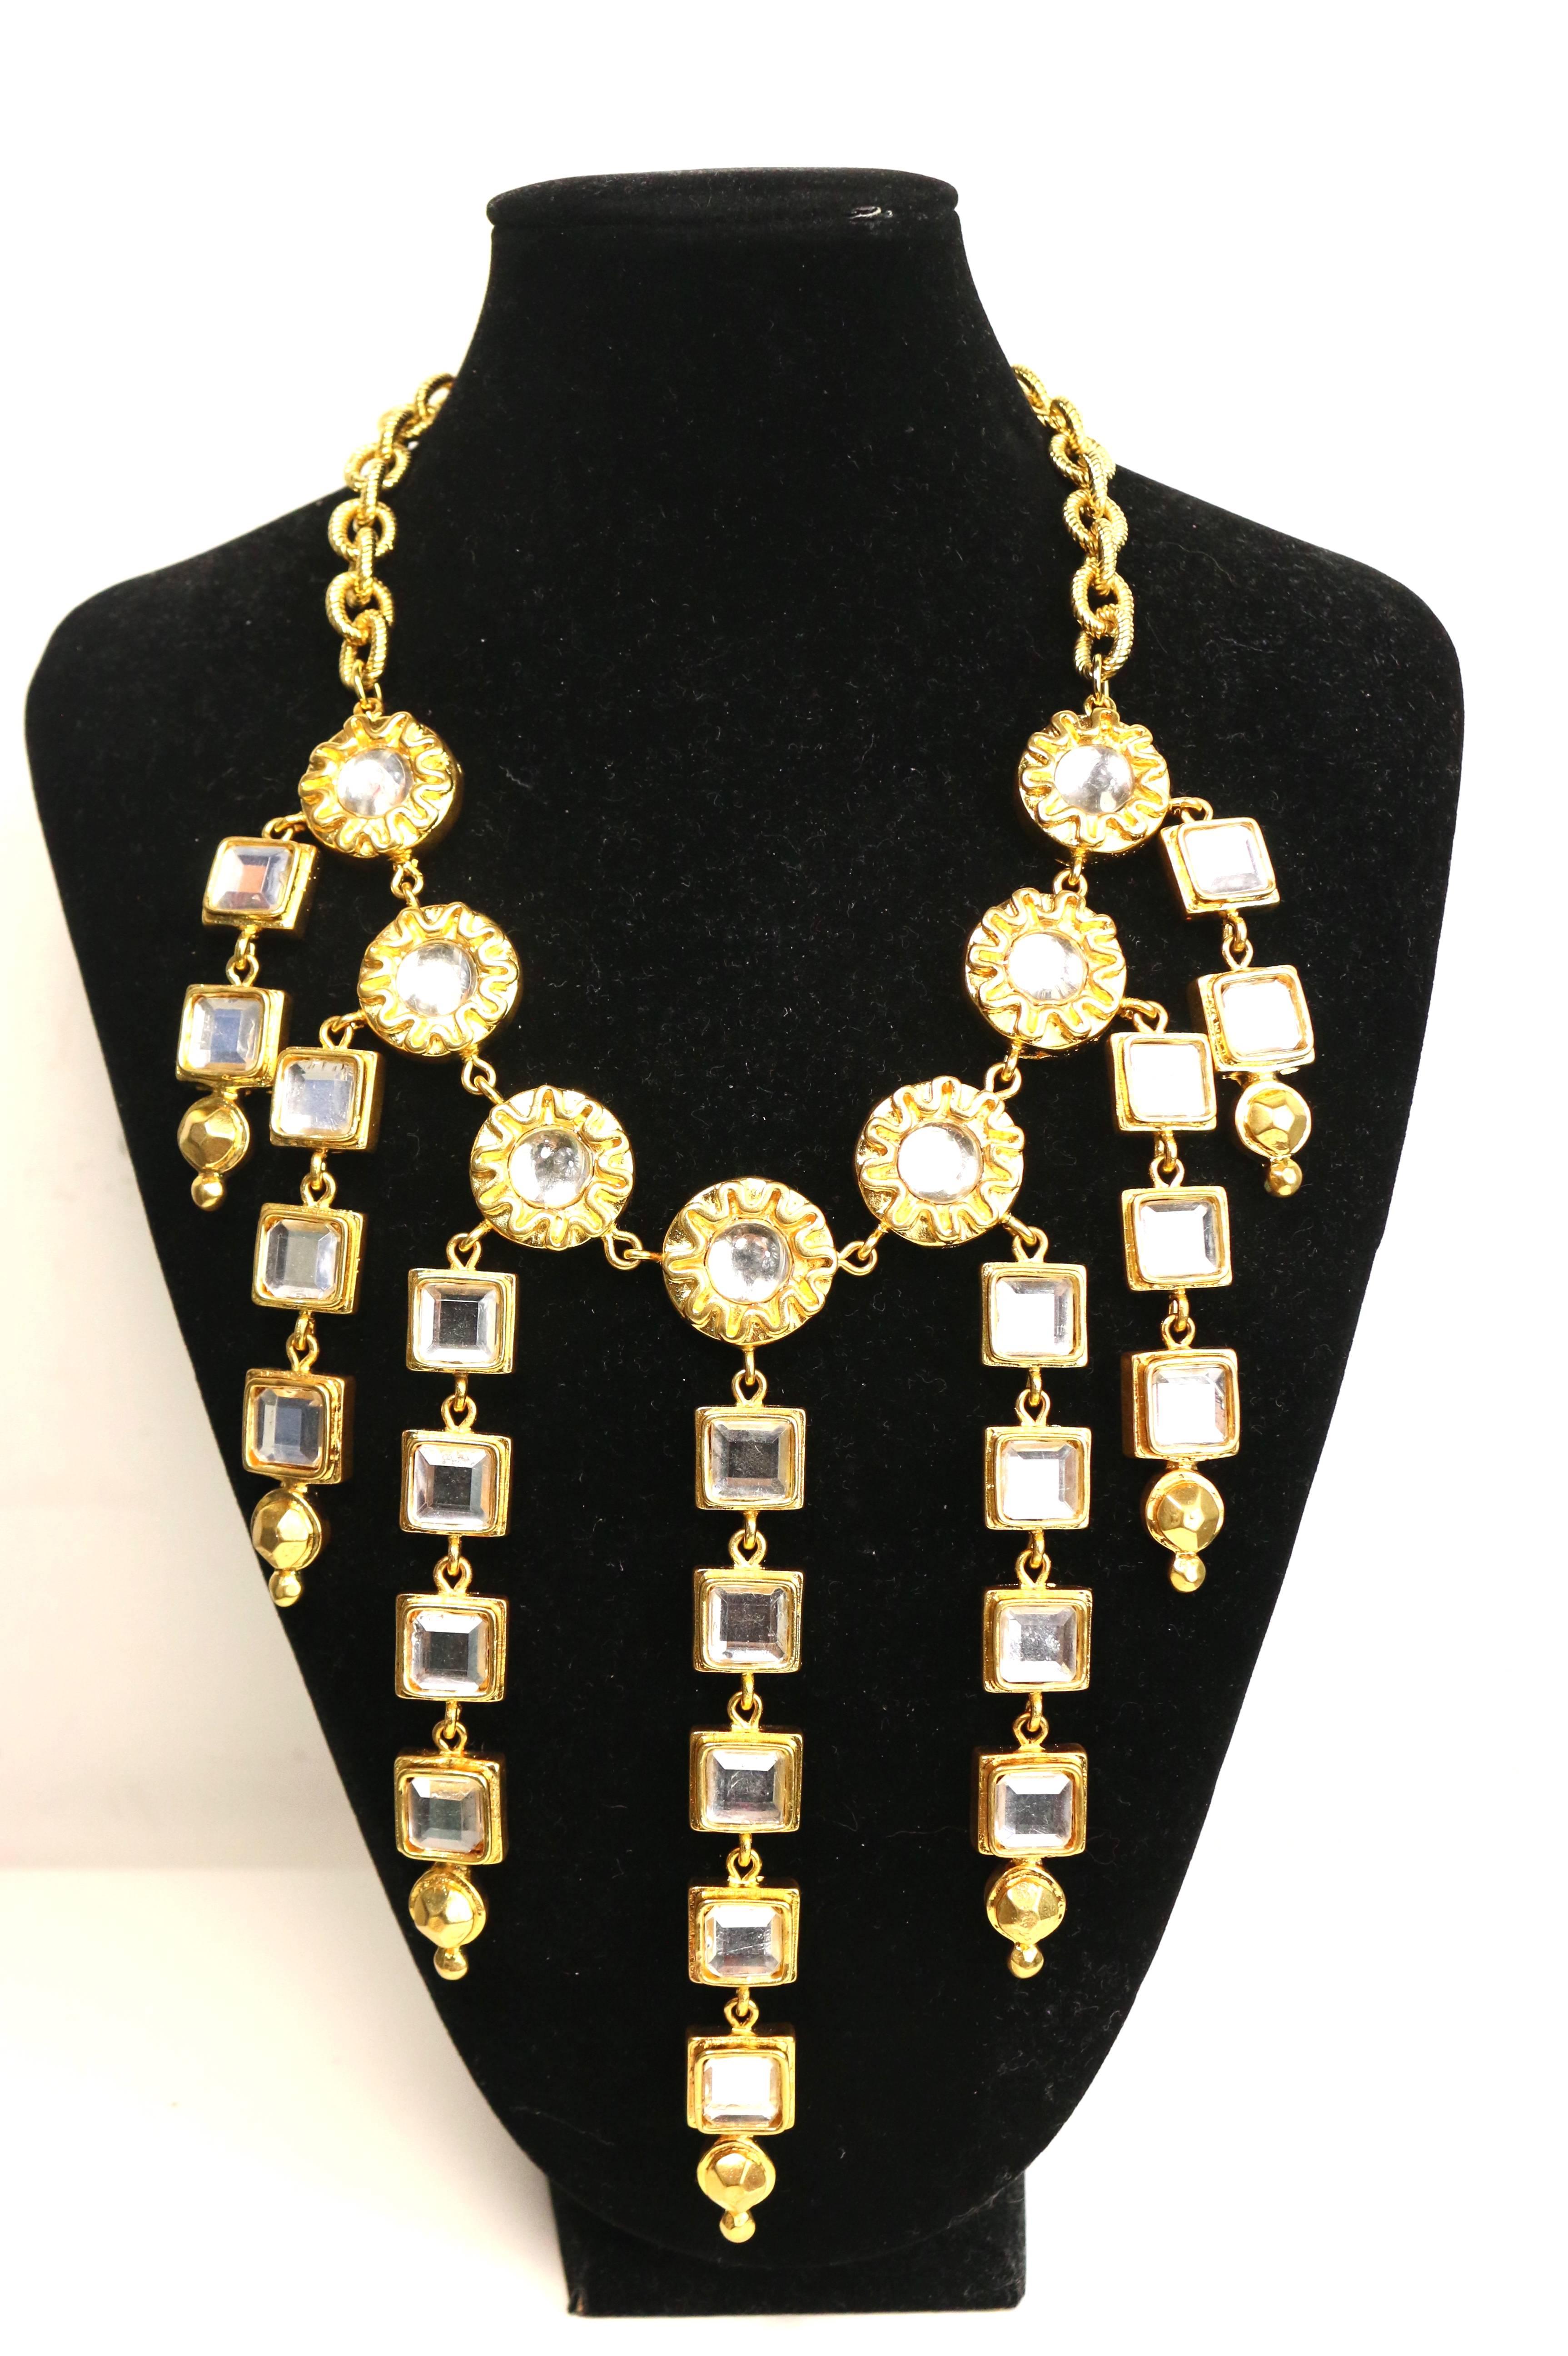 - Vintage 80s Escada gold toned setting rhinestones statement necklace. 

- Featuring round gold toned setting rhinestones attached to few drops square gold toned setting rhinestones. 

- Gold toned hook closure. 

- Height: 15 inches. Width of the